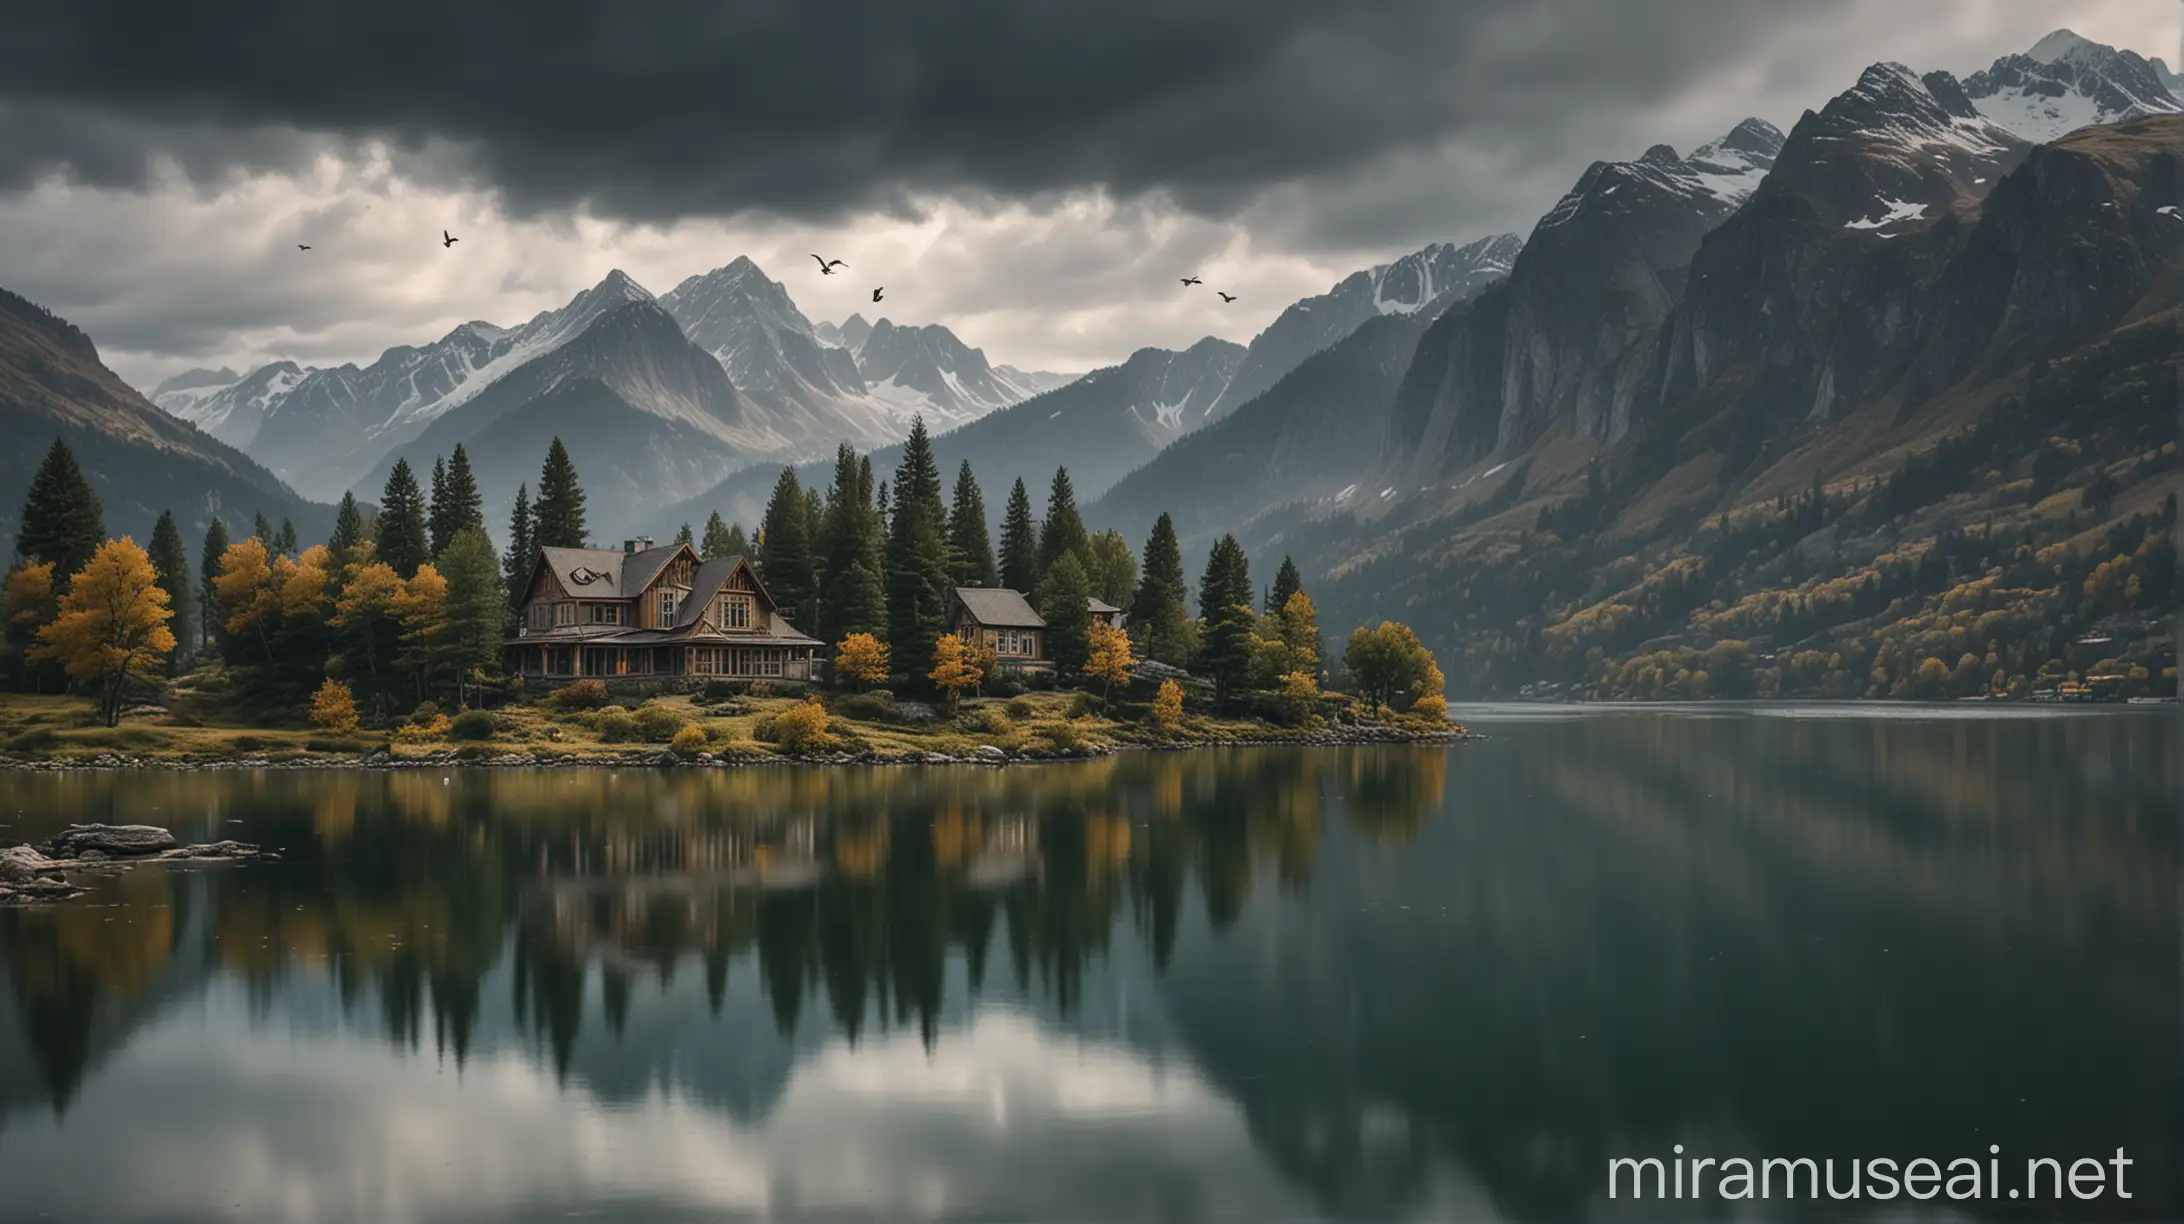 Tranquil Mountain Landscape with Reflective Lake and Quaint House